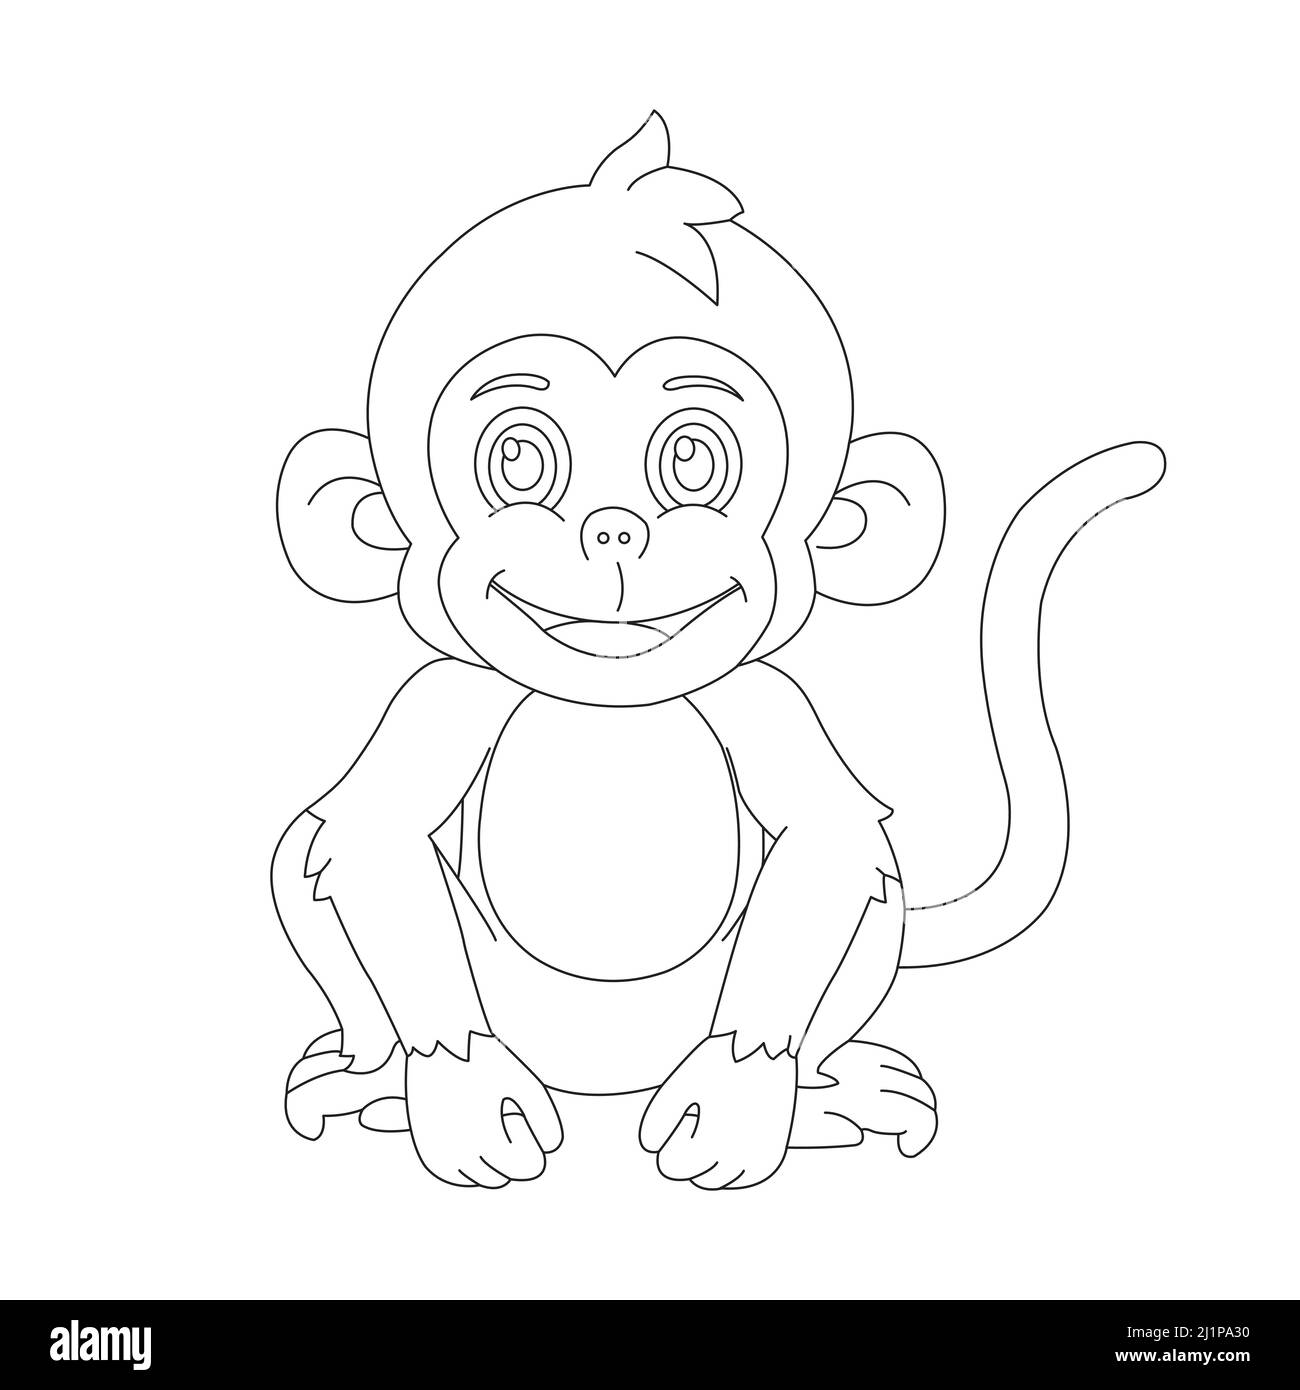 Cute little monkey outline coloring page for kids animal coloring book  cartoon vector illustration Stock Vector Image & Art - Alamy